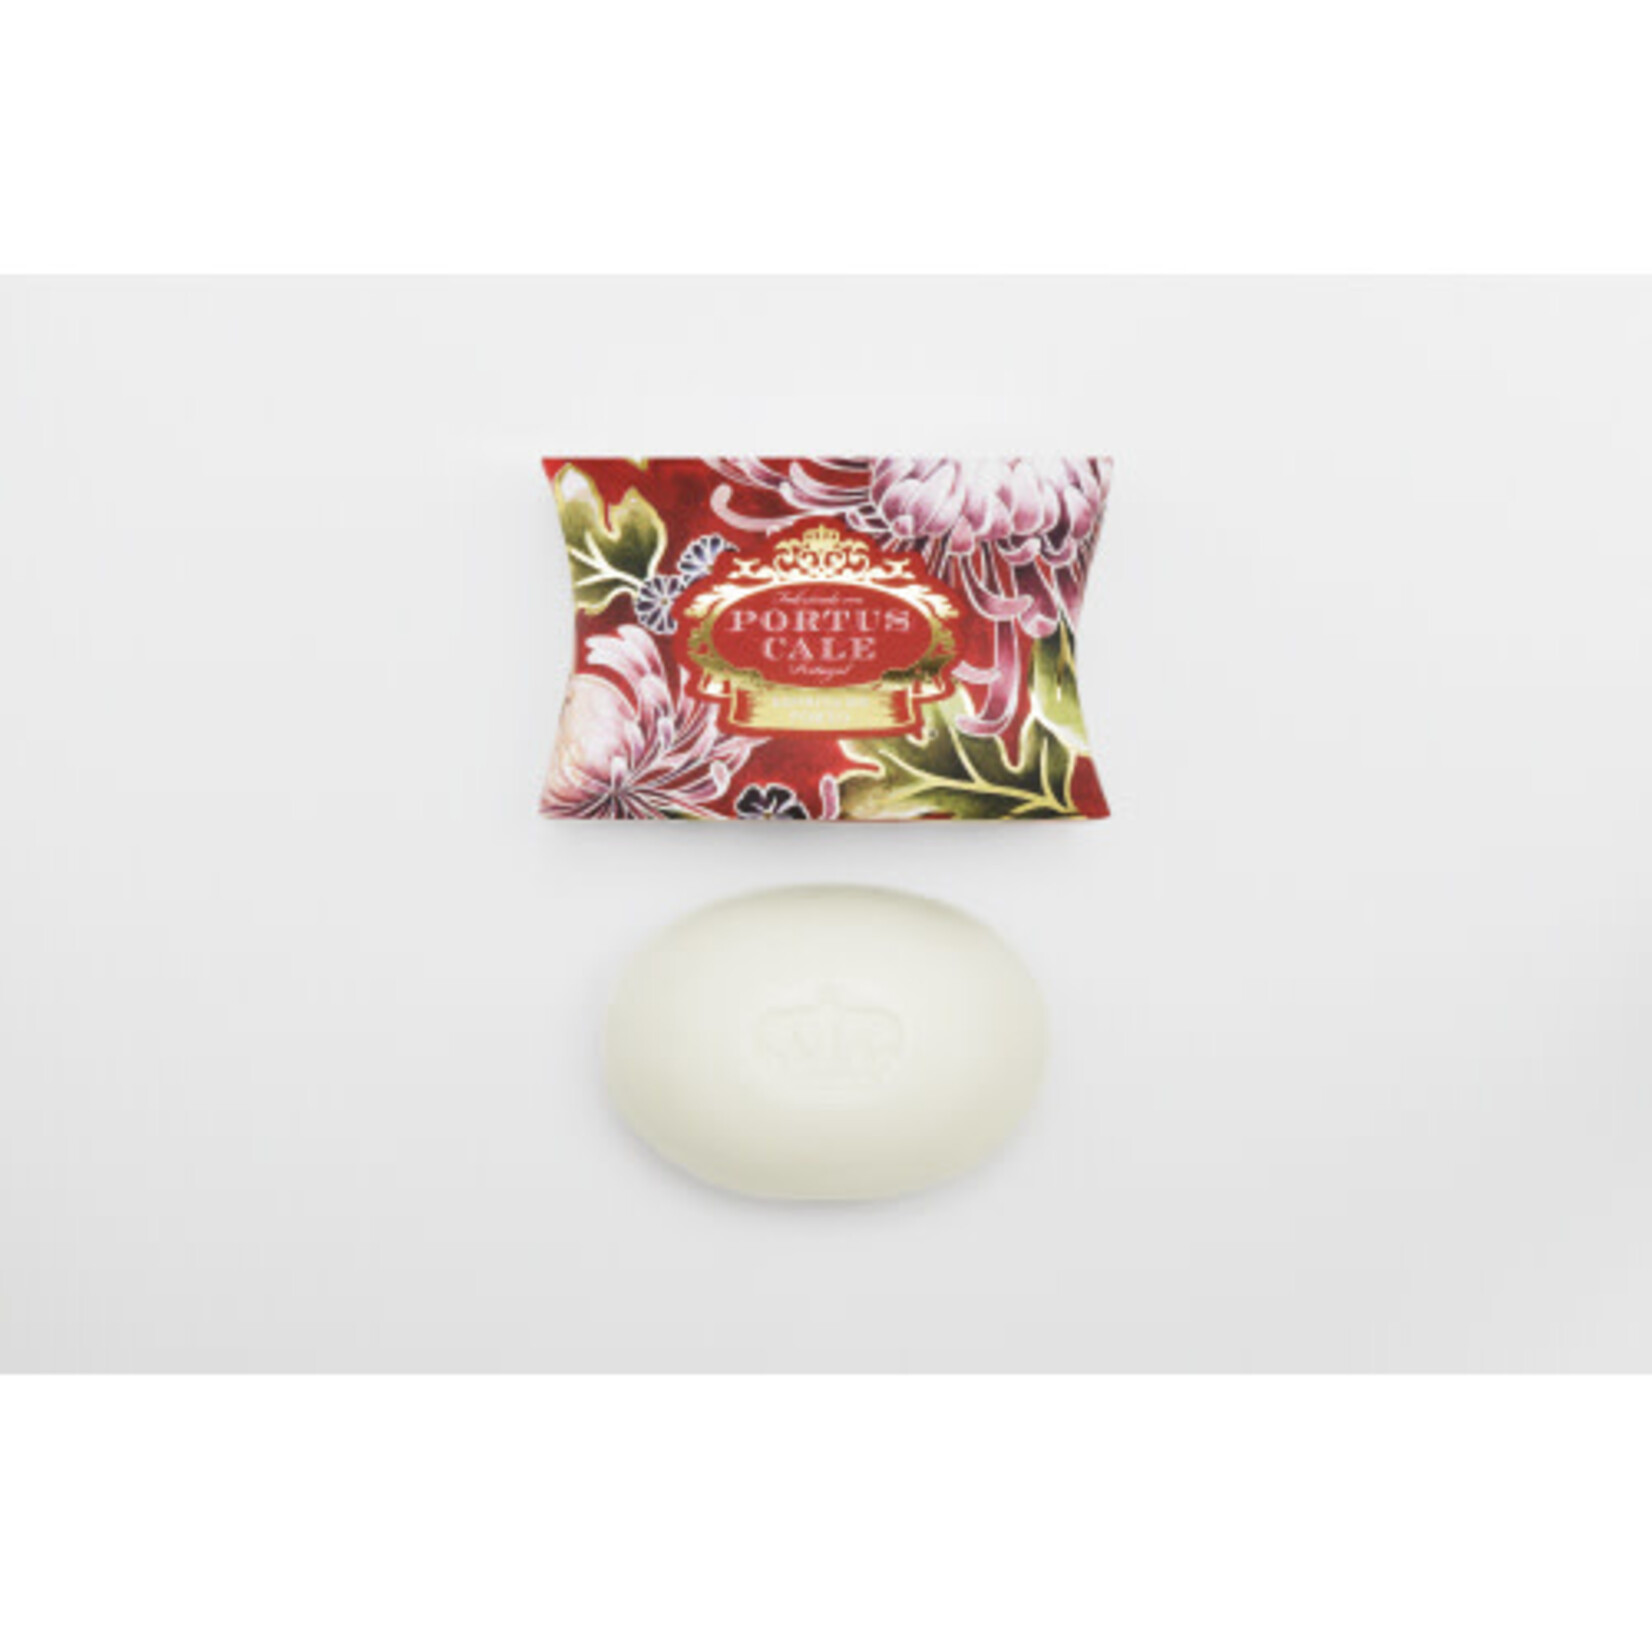 Portus Cale Noble Red 40g Soap